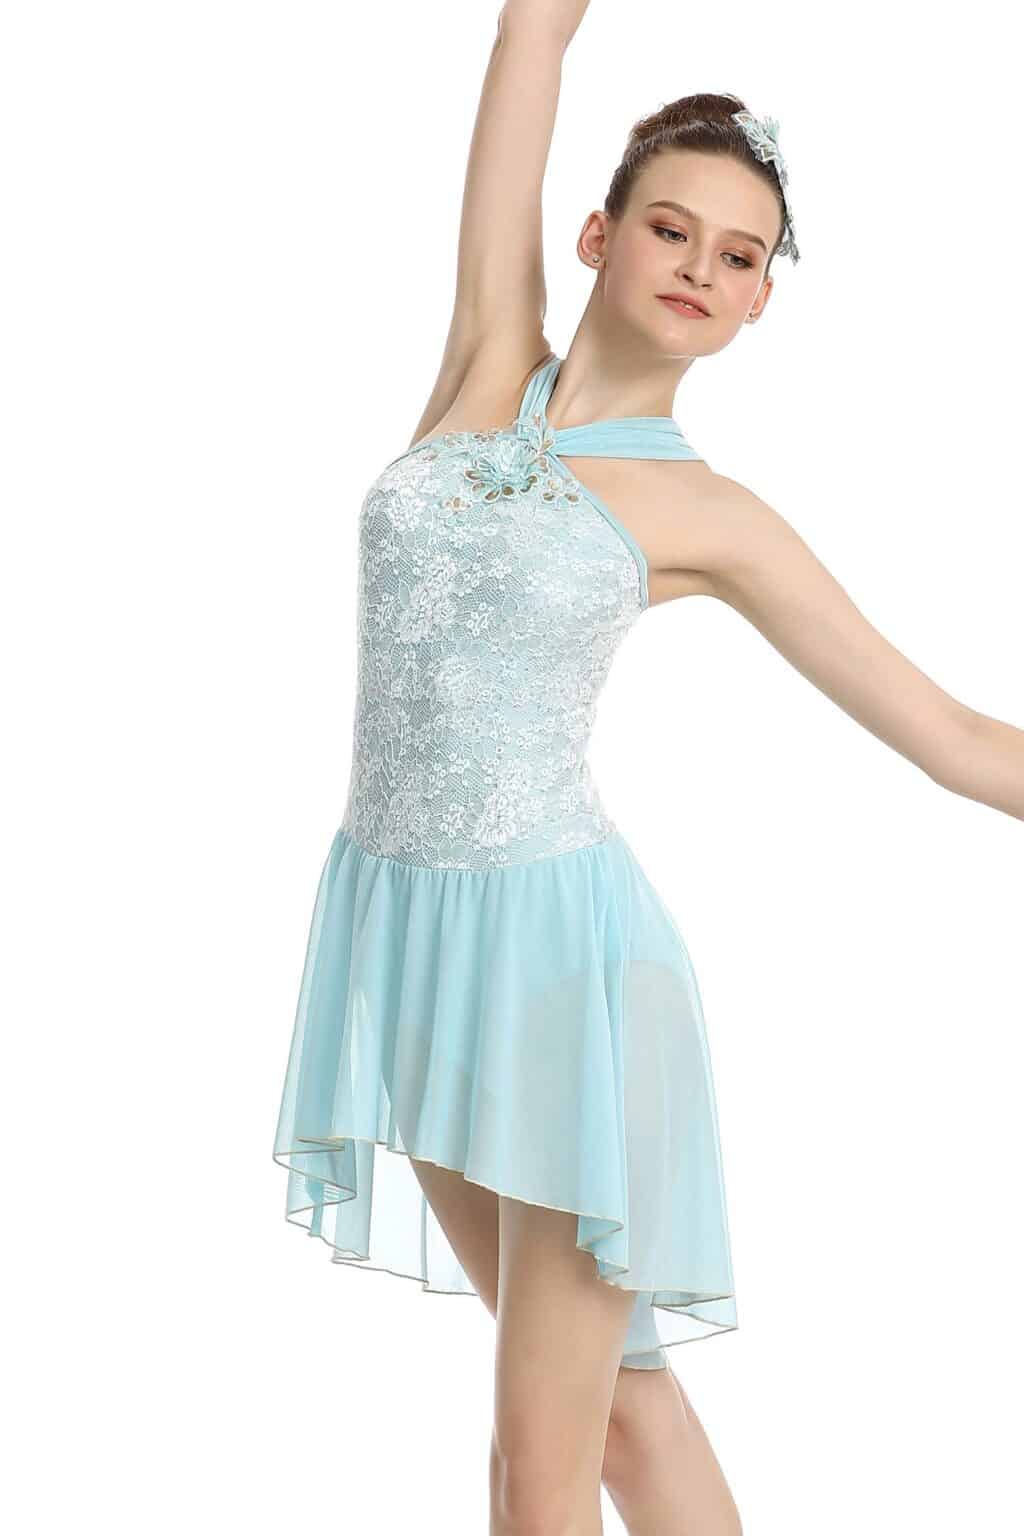 Contemporary and Lyrical Dancewear- lace and glitter costume